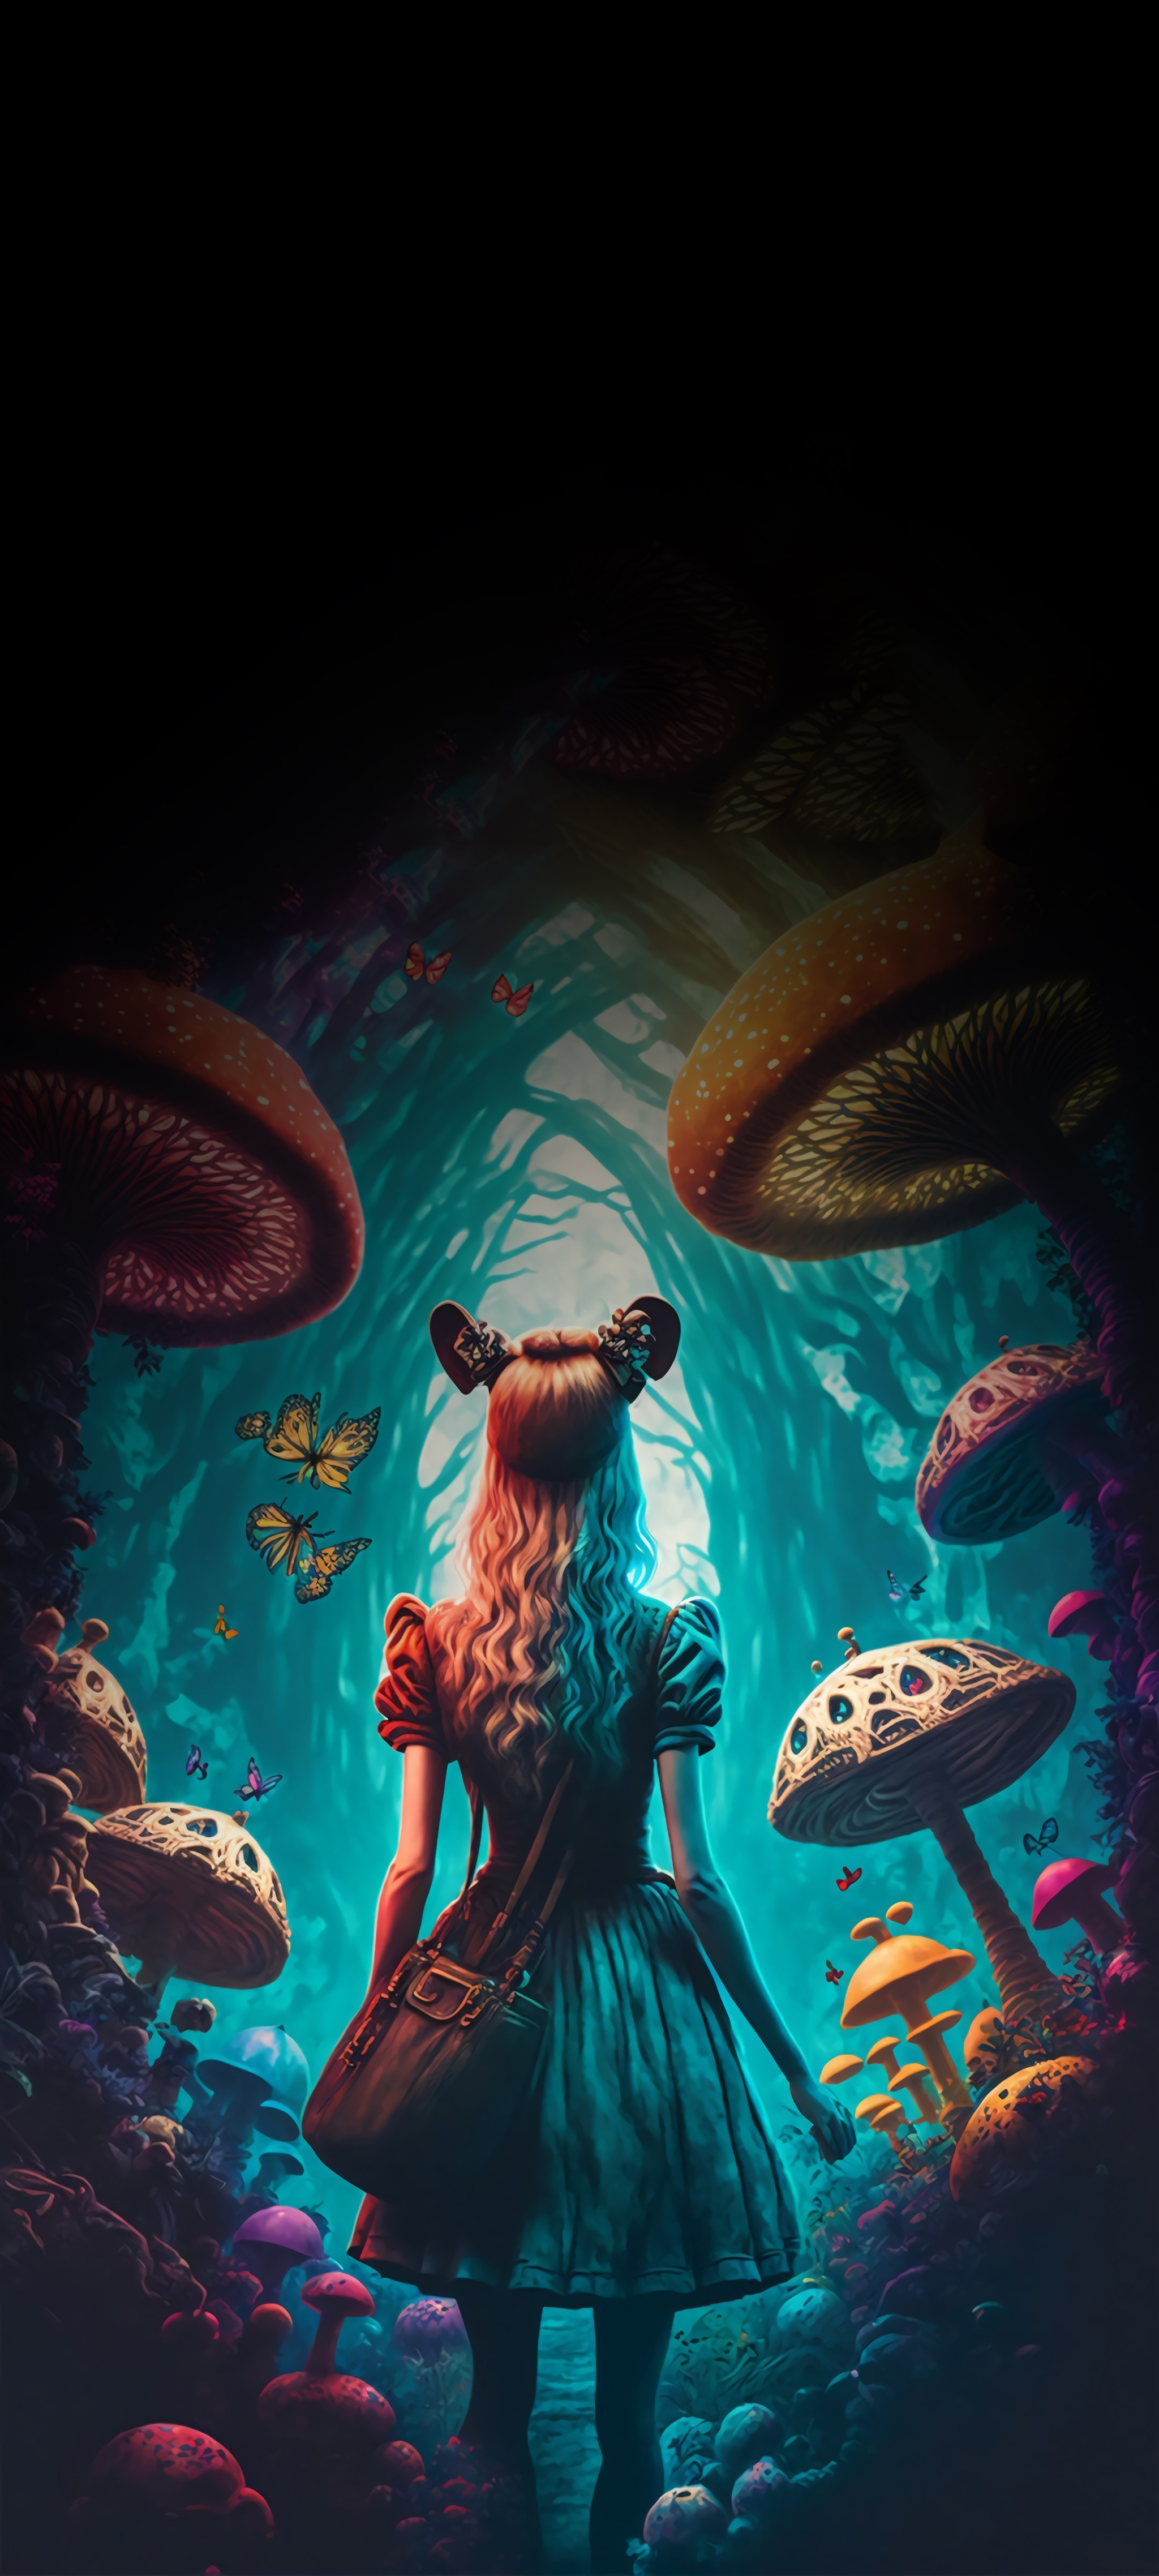 Enter a magical world with a k alice in wonderland wallpaper for iphone